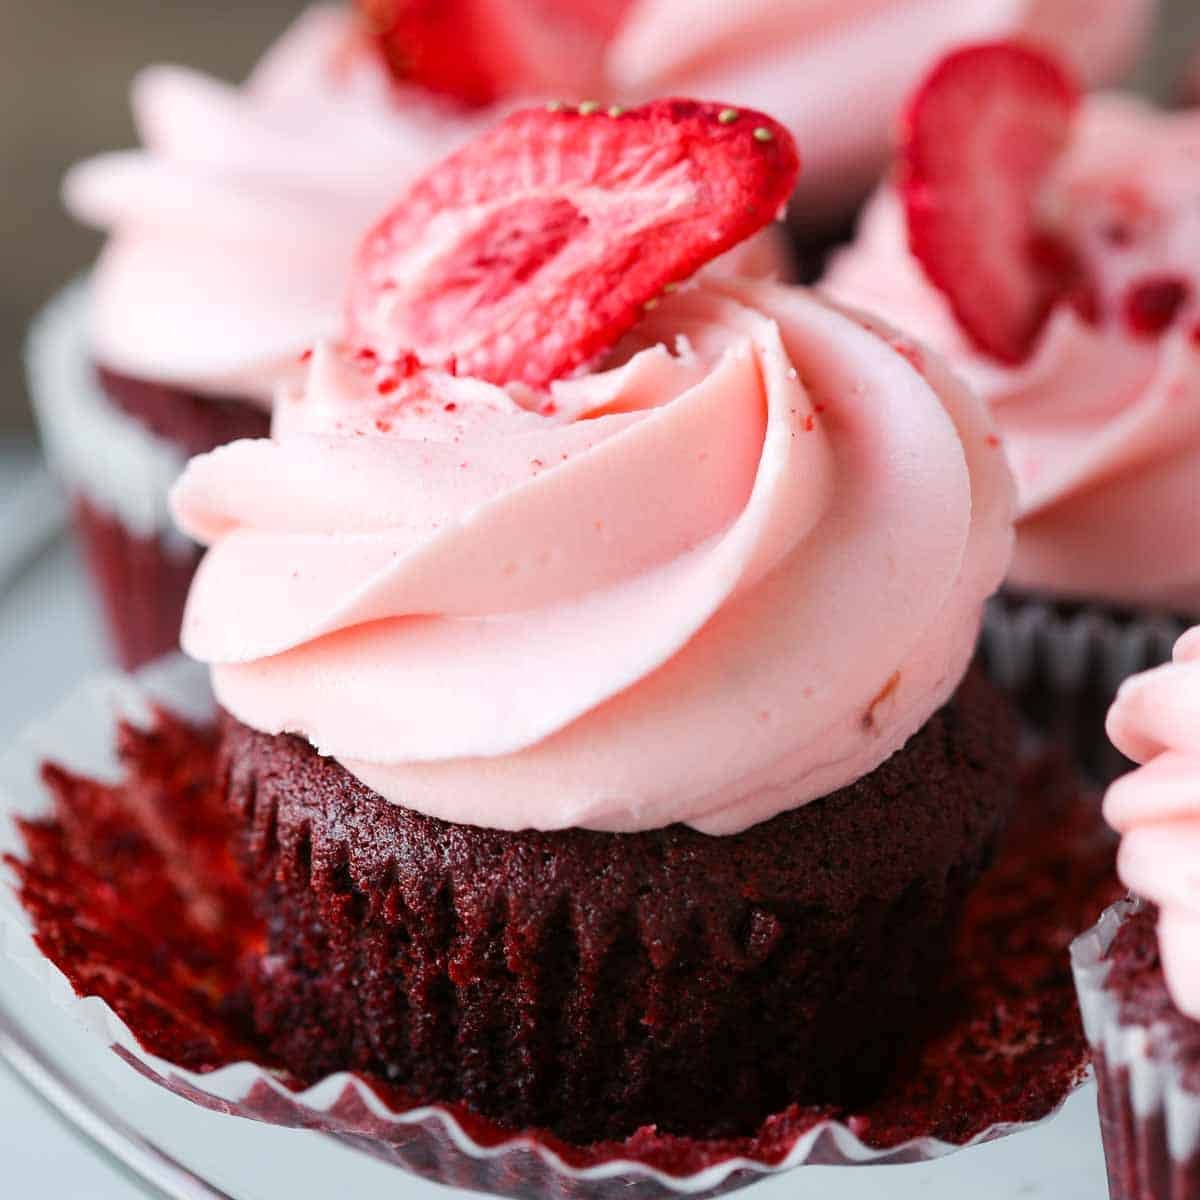 strawberry cream cheese buttercream on red velvet cupcake piped with strawberry on top.